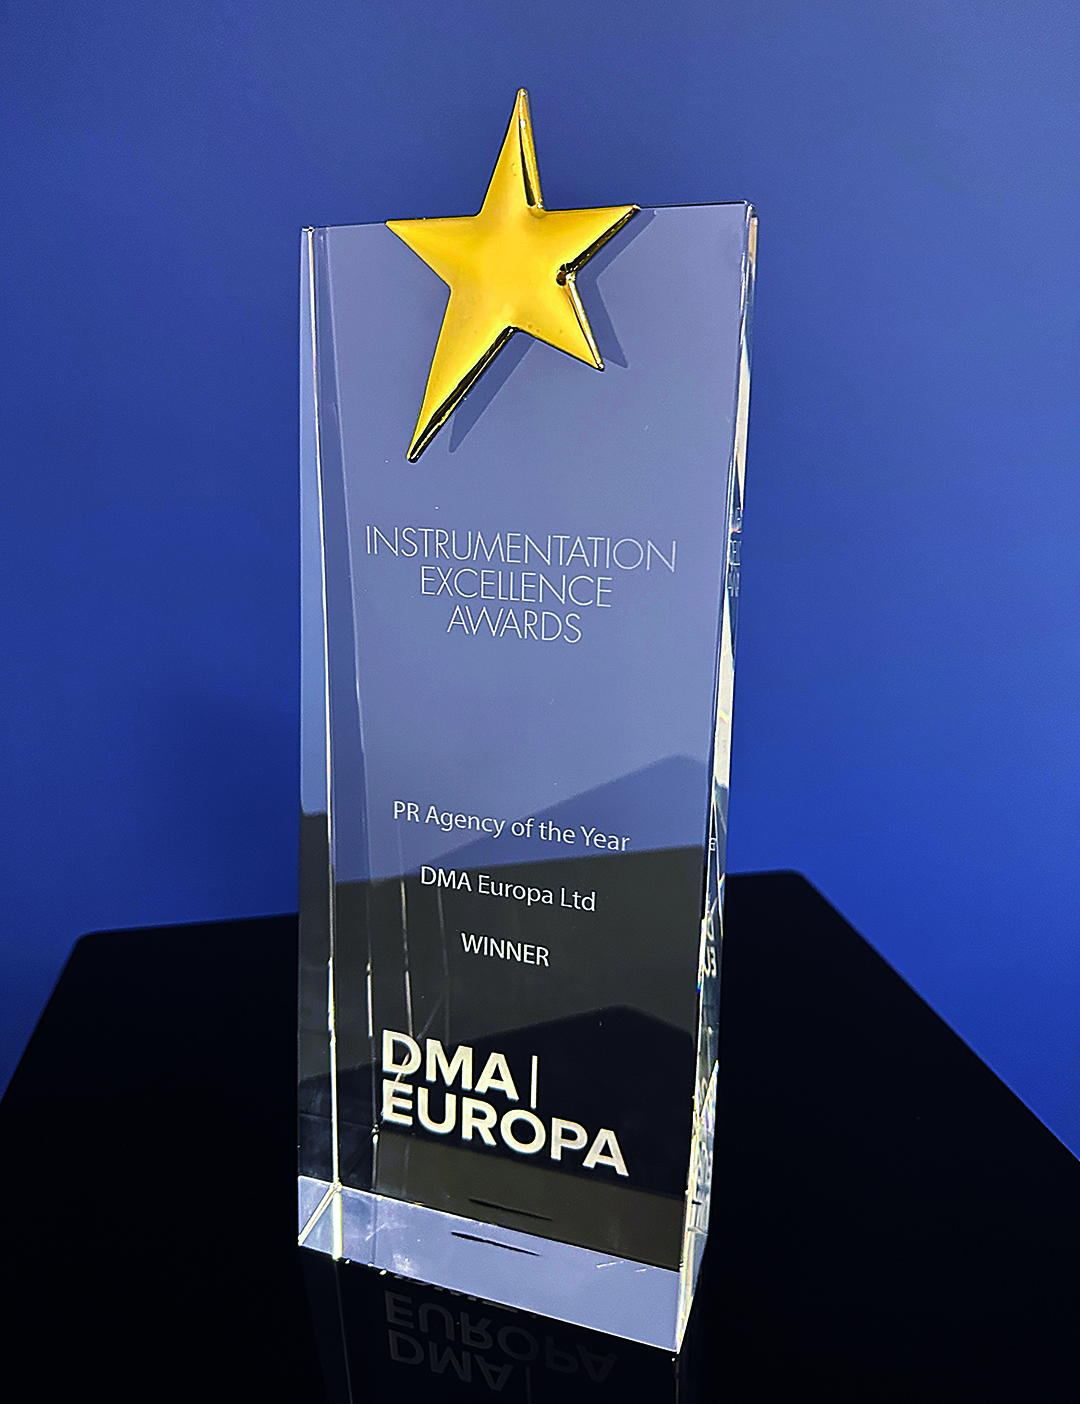 The “PR Agency of the Year” award was received by Philip Howe Account Director, DMA Europa and Chiara Civardi Senior Technical Writer, DMA Europa at a gala event ceremony on Thursday 19th October 2023 at the Grand Connaught Rooms, Covent Garden, London.